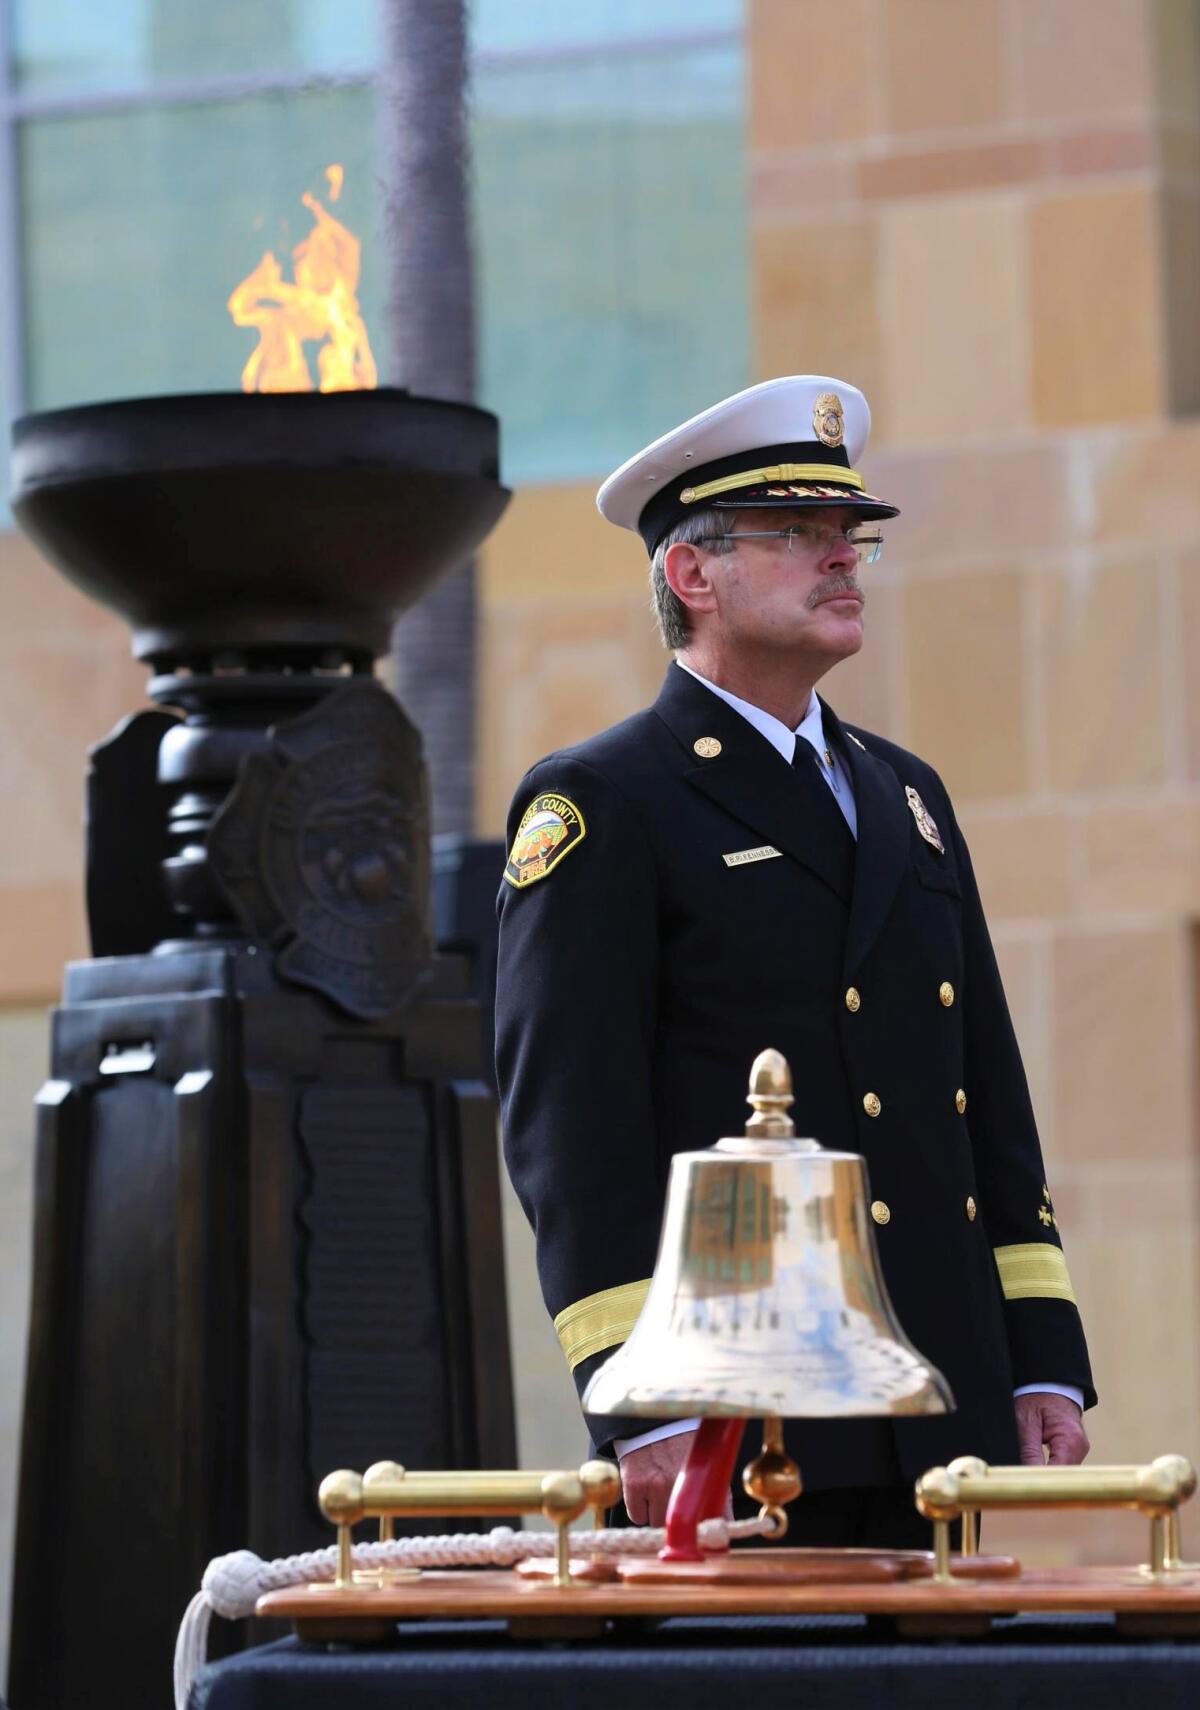 Orange County Fire Authority Chief Brian Fennessy at a 9/11 remembrance ceremony outside the agency's Irvine headquarters.